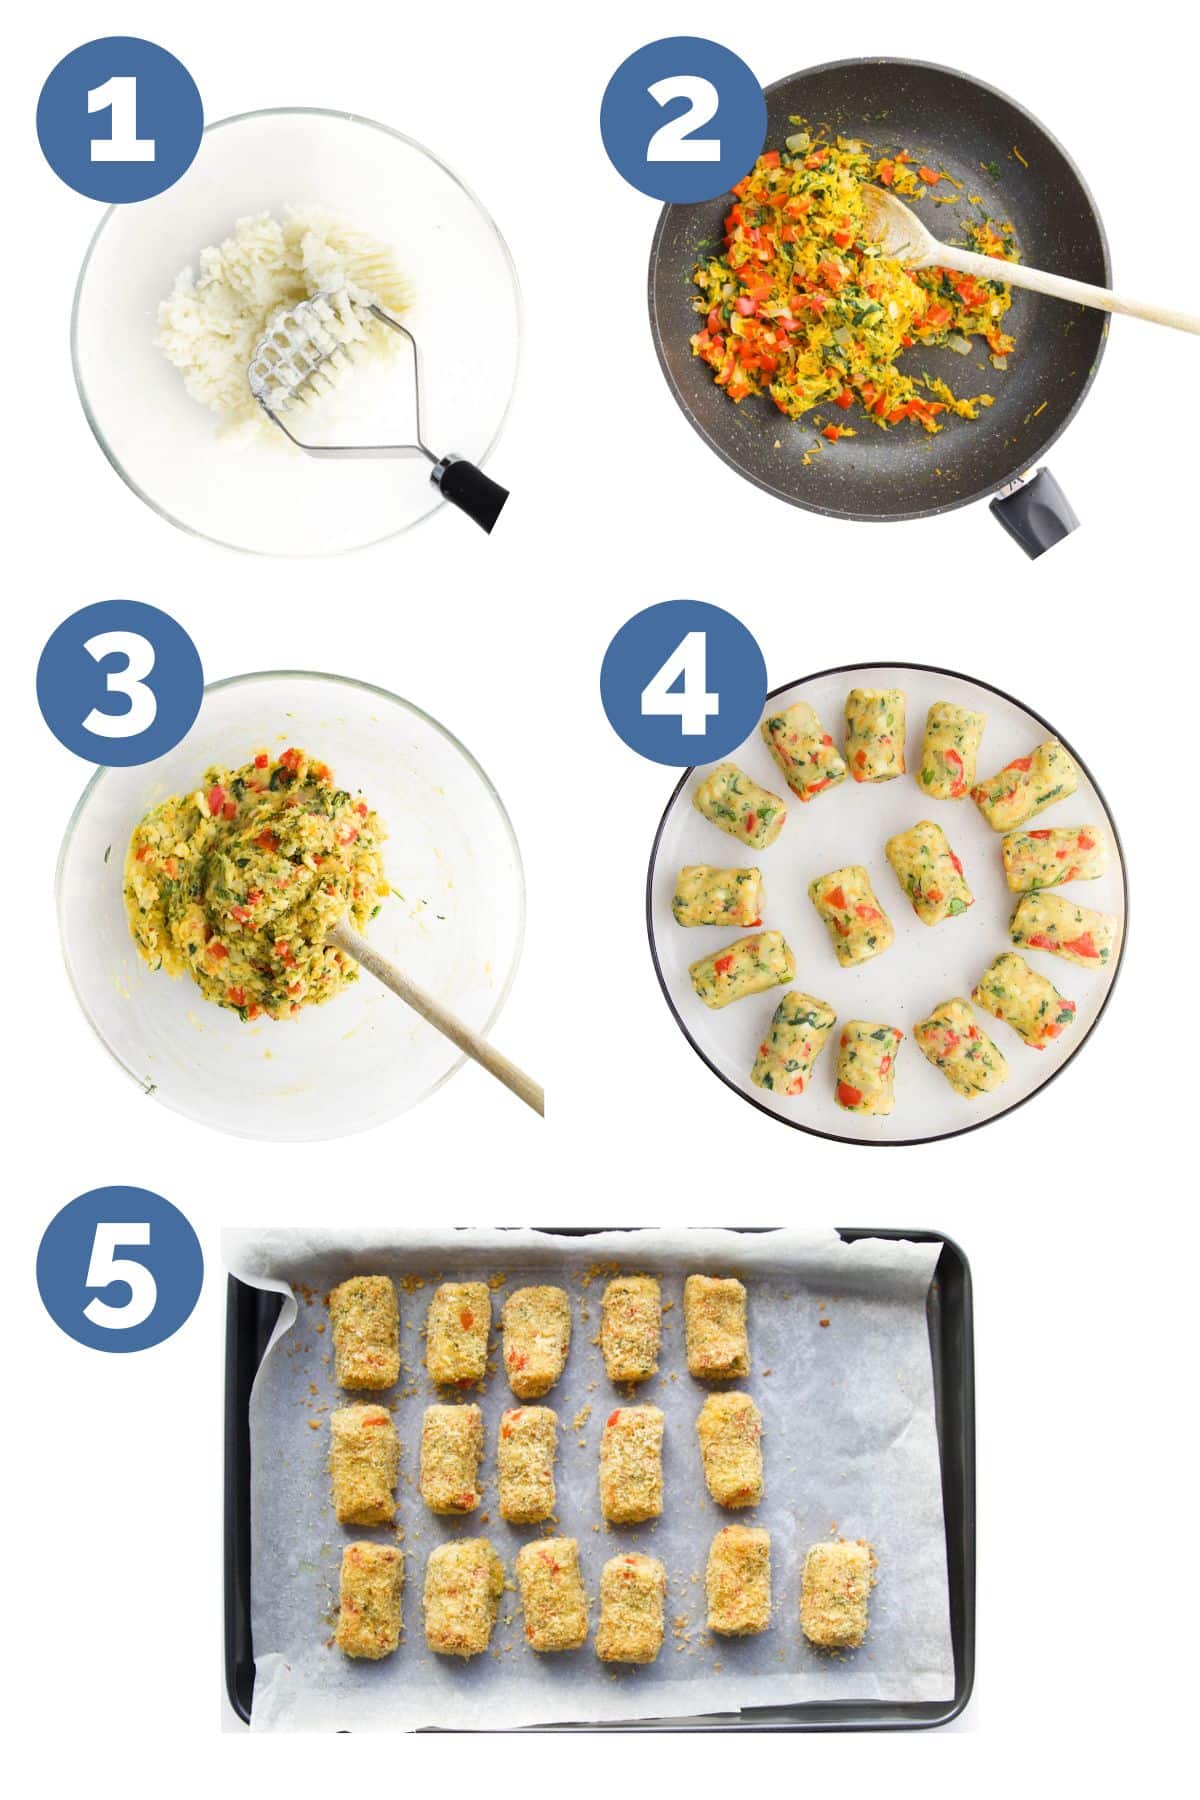 Collage of 5 Images Showing Different Steps to Make Croquettes 1) Mash Potato 2)Saute Vegetables 3)Mix All Ingredients in Bowl 4) Form into Log Shapes 5) Croquettes Placed on Baking Tray